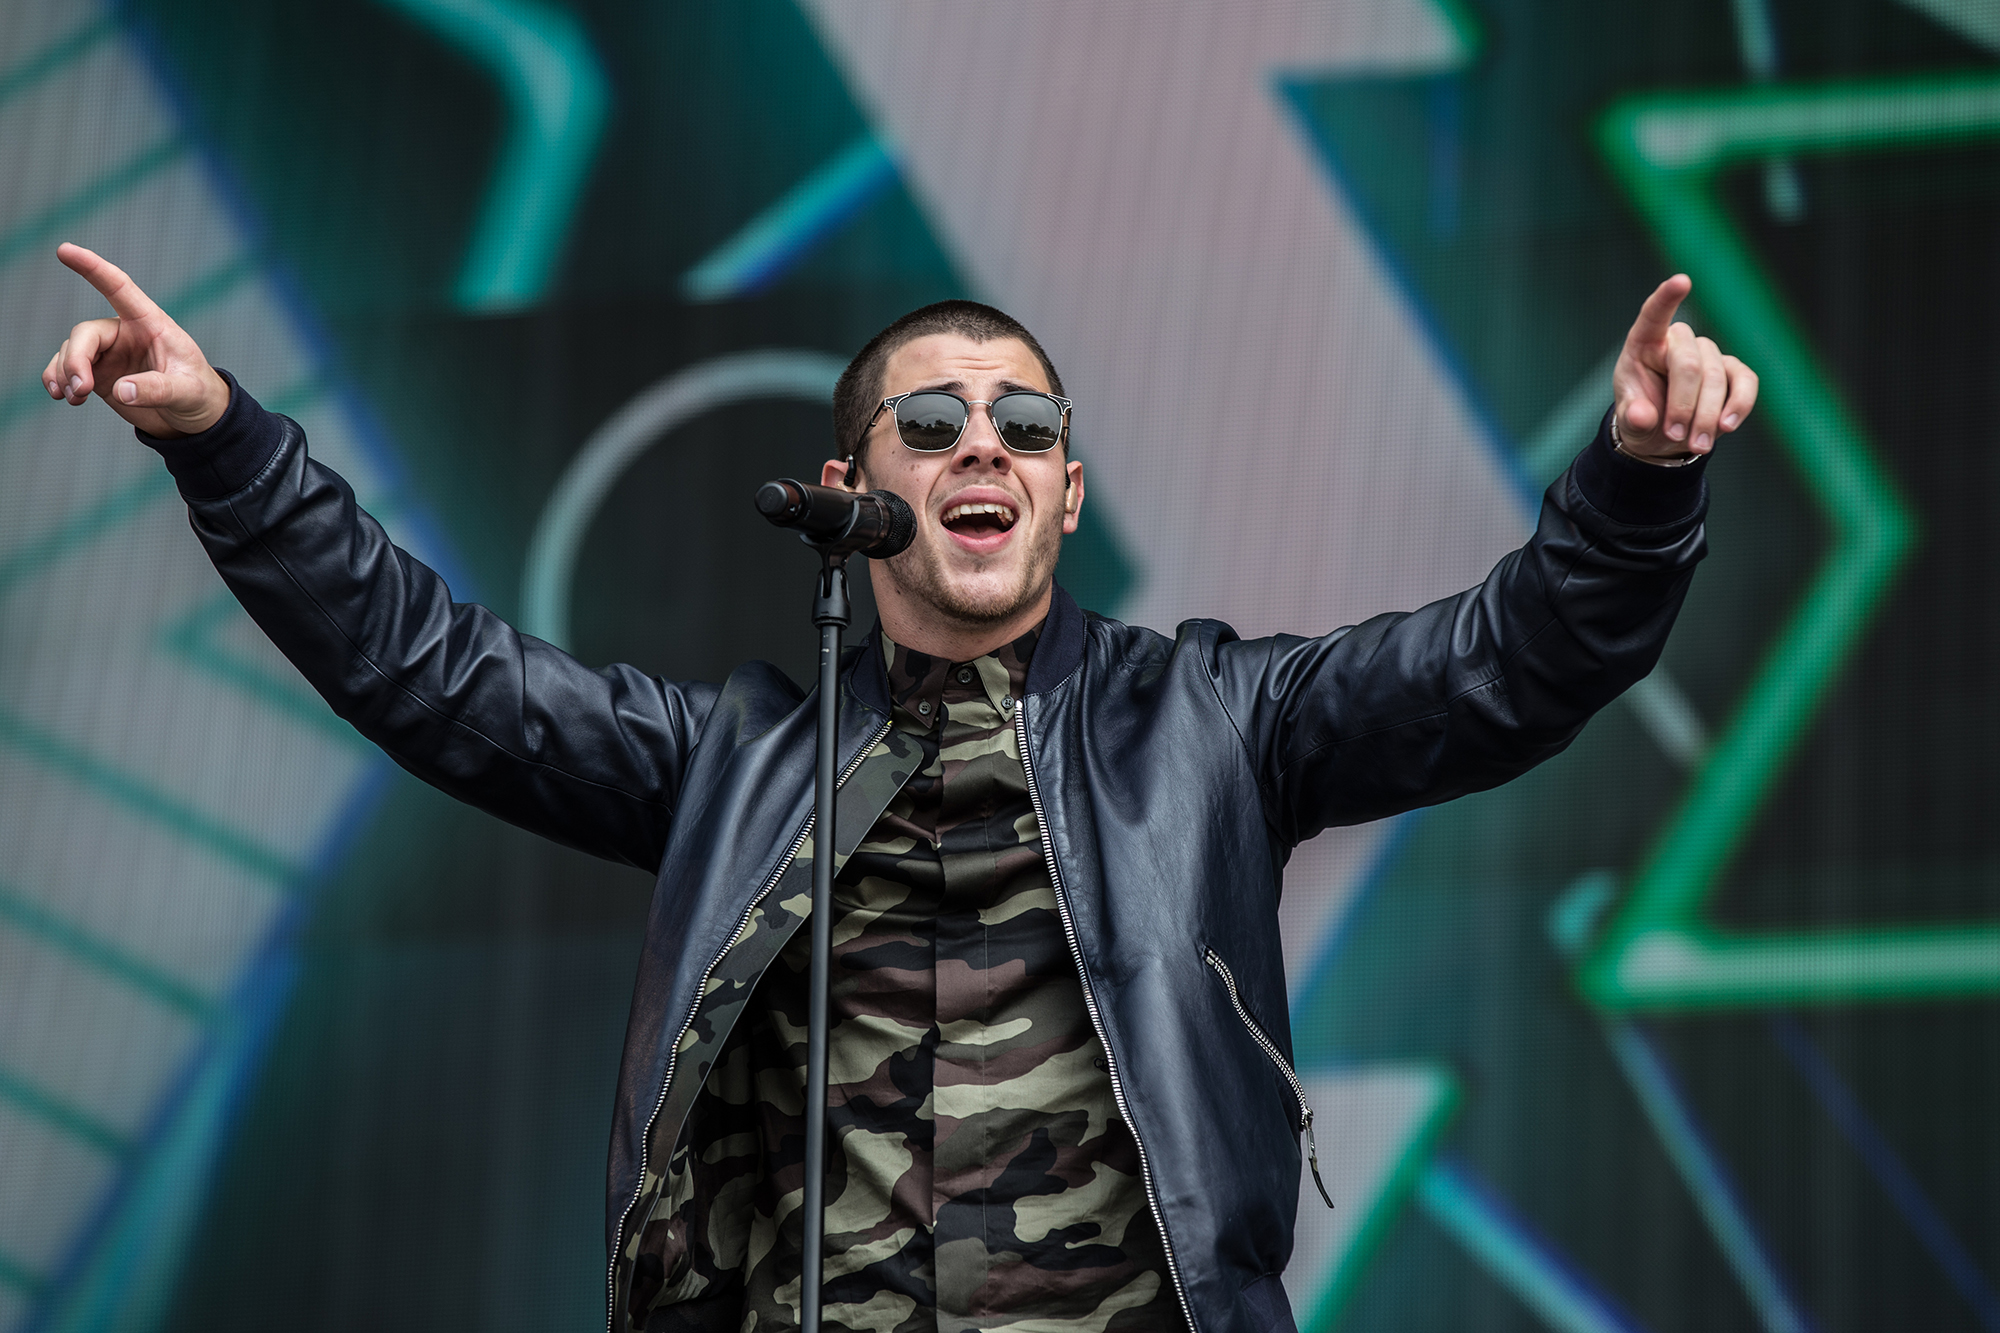 EXETER, ENGLAND - MAY 28:  Nick Jonas performs at Powderham Castle (Photo by Mike Lewis Photography/Redferns) (Mike Lewis Photography&mdash;Redferns)